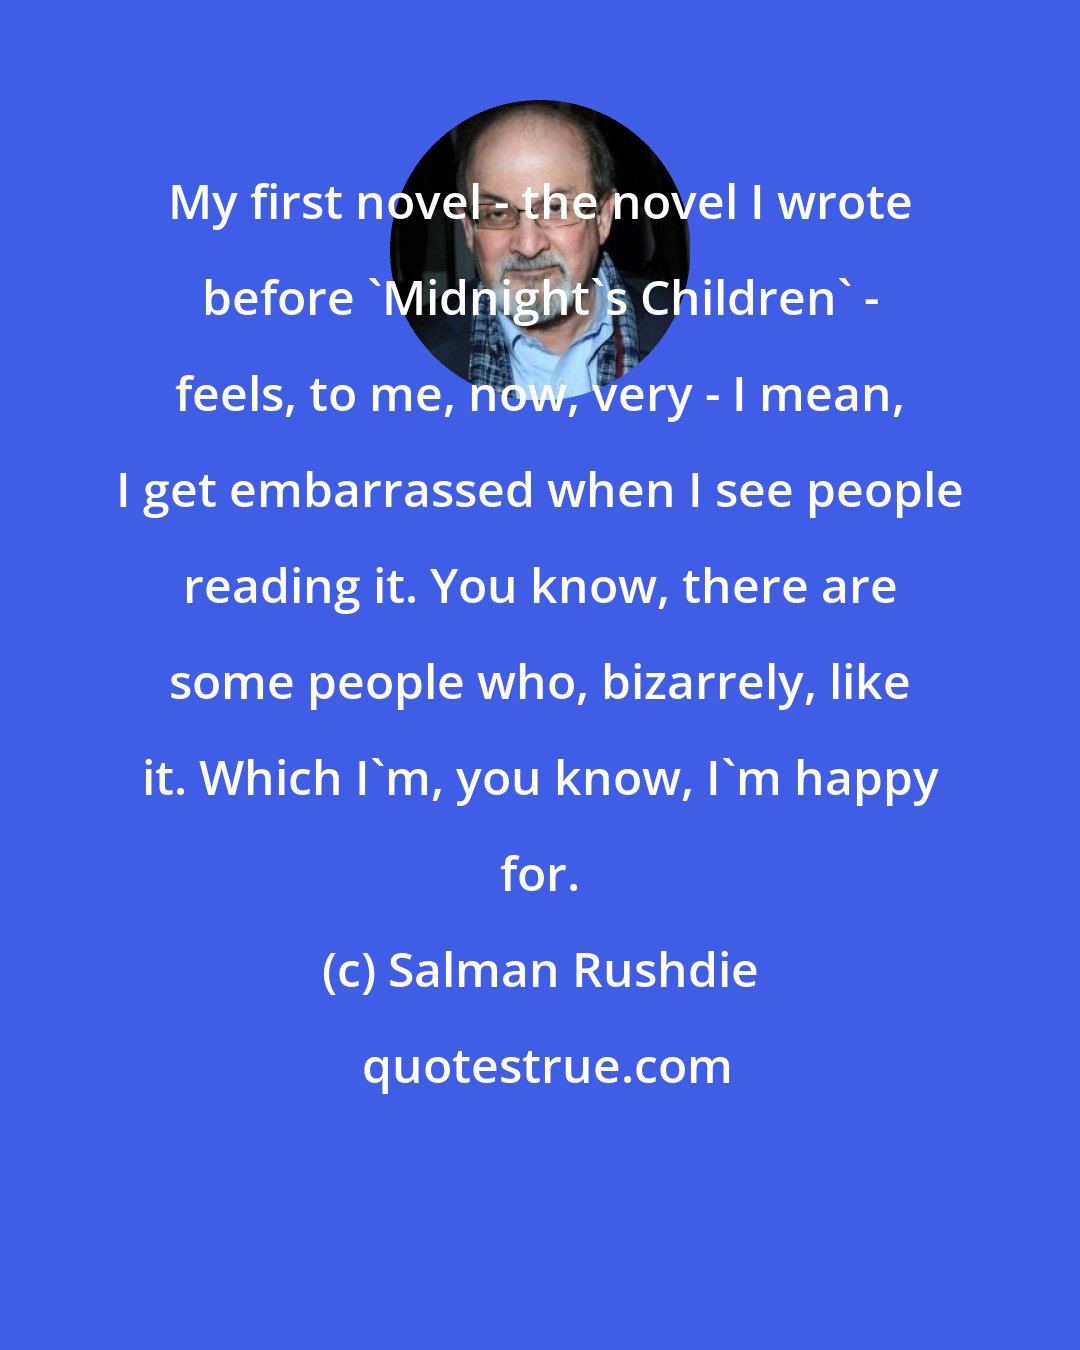 Salman Rushdie: My first novel - the novel I wrote before 'Midnight's Children' - feels, to me, now, very - I mean, I get embarrassed when I see people reading it. You know, there are some people who, bizarrely, like it. Which I'm, you know, I'm happy for.